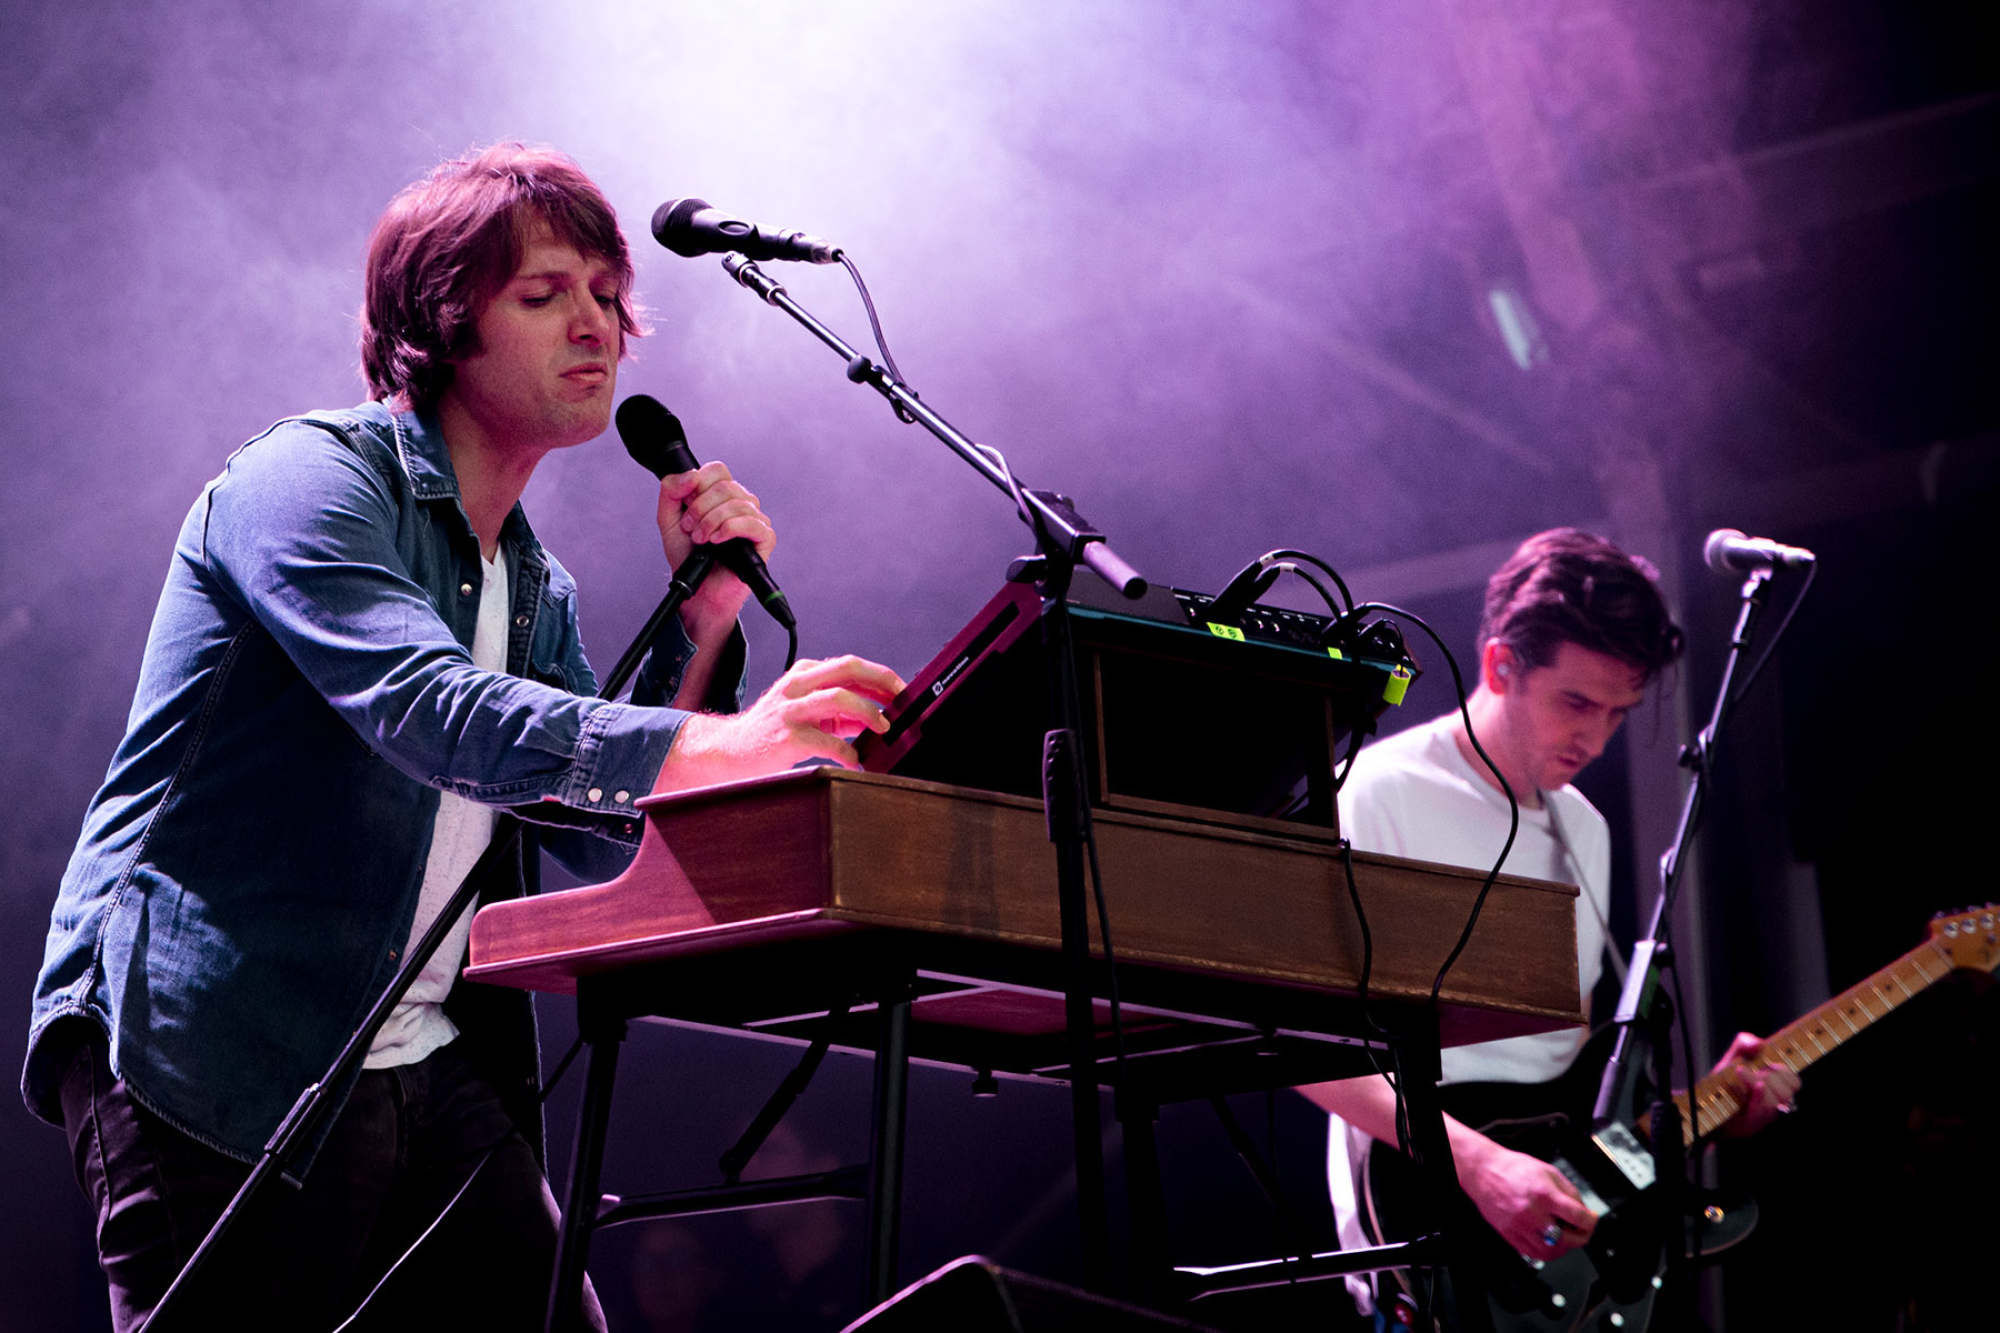 Live Review + Photos: Paolo Nutini Bristol Sounds | Tap The Feed 2000x1340